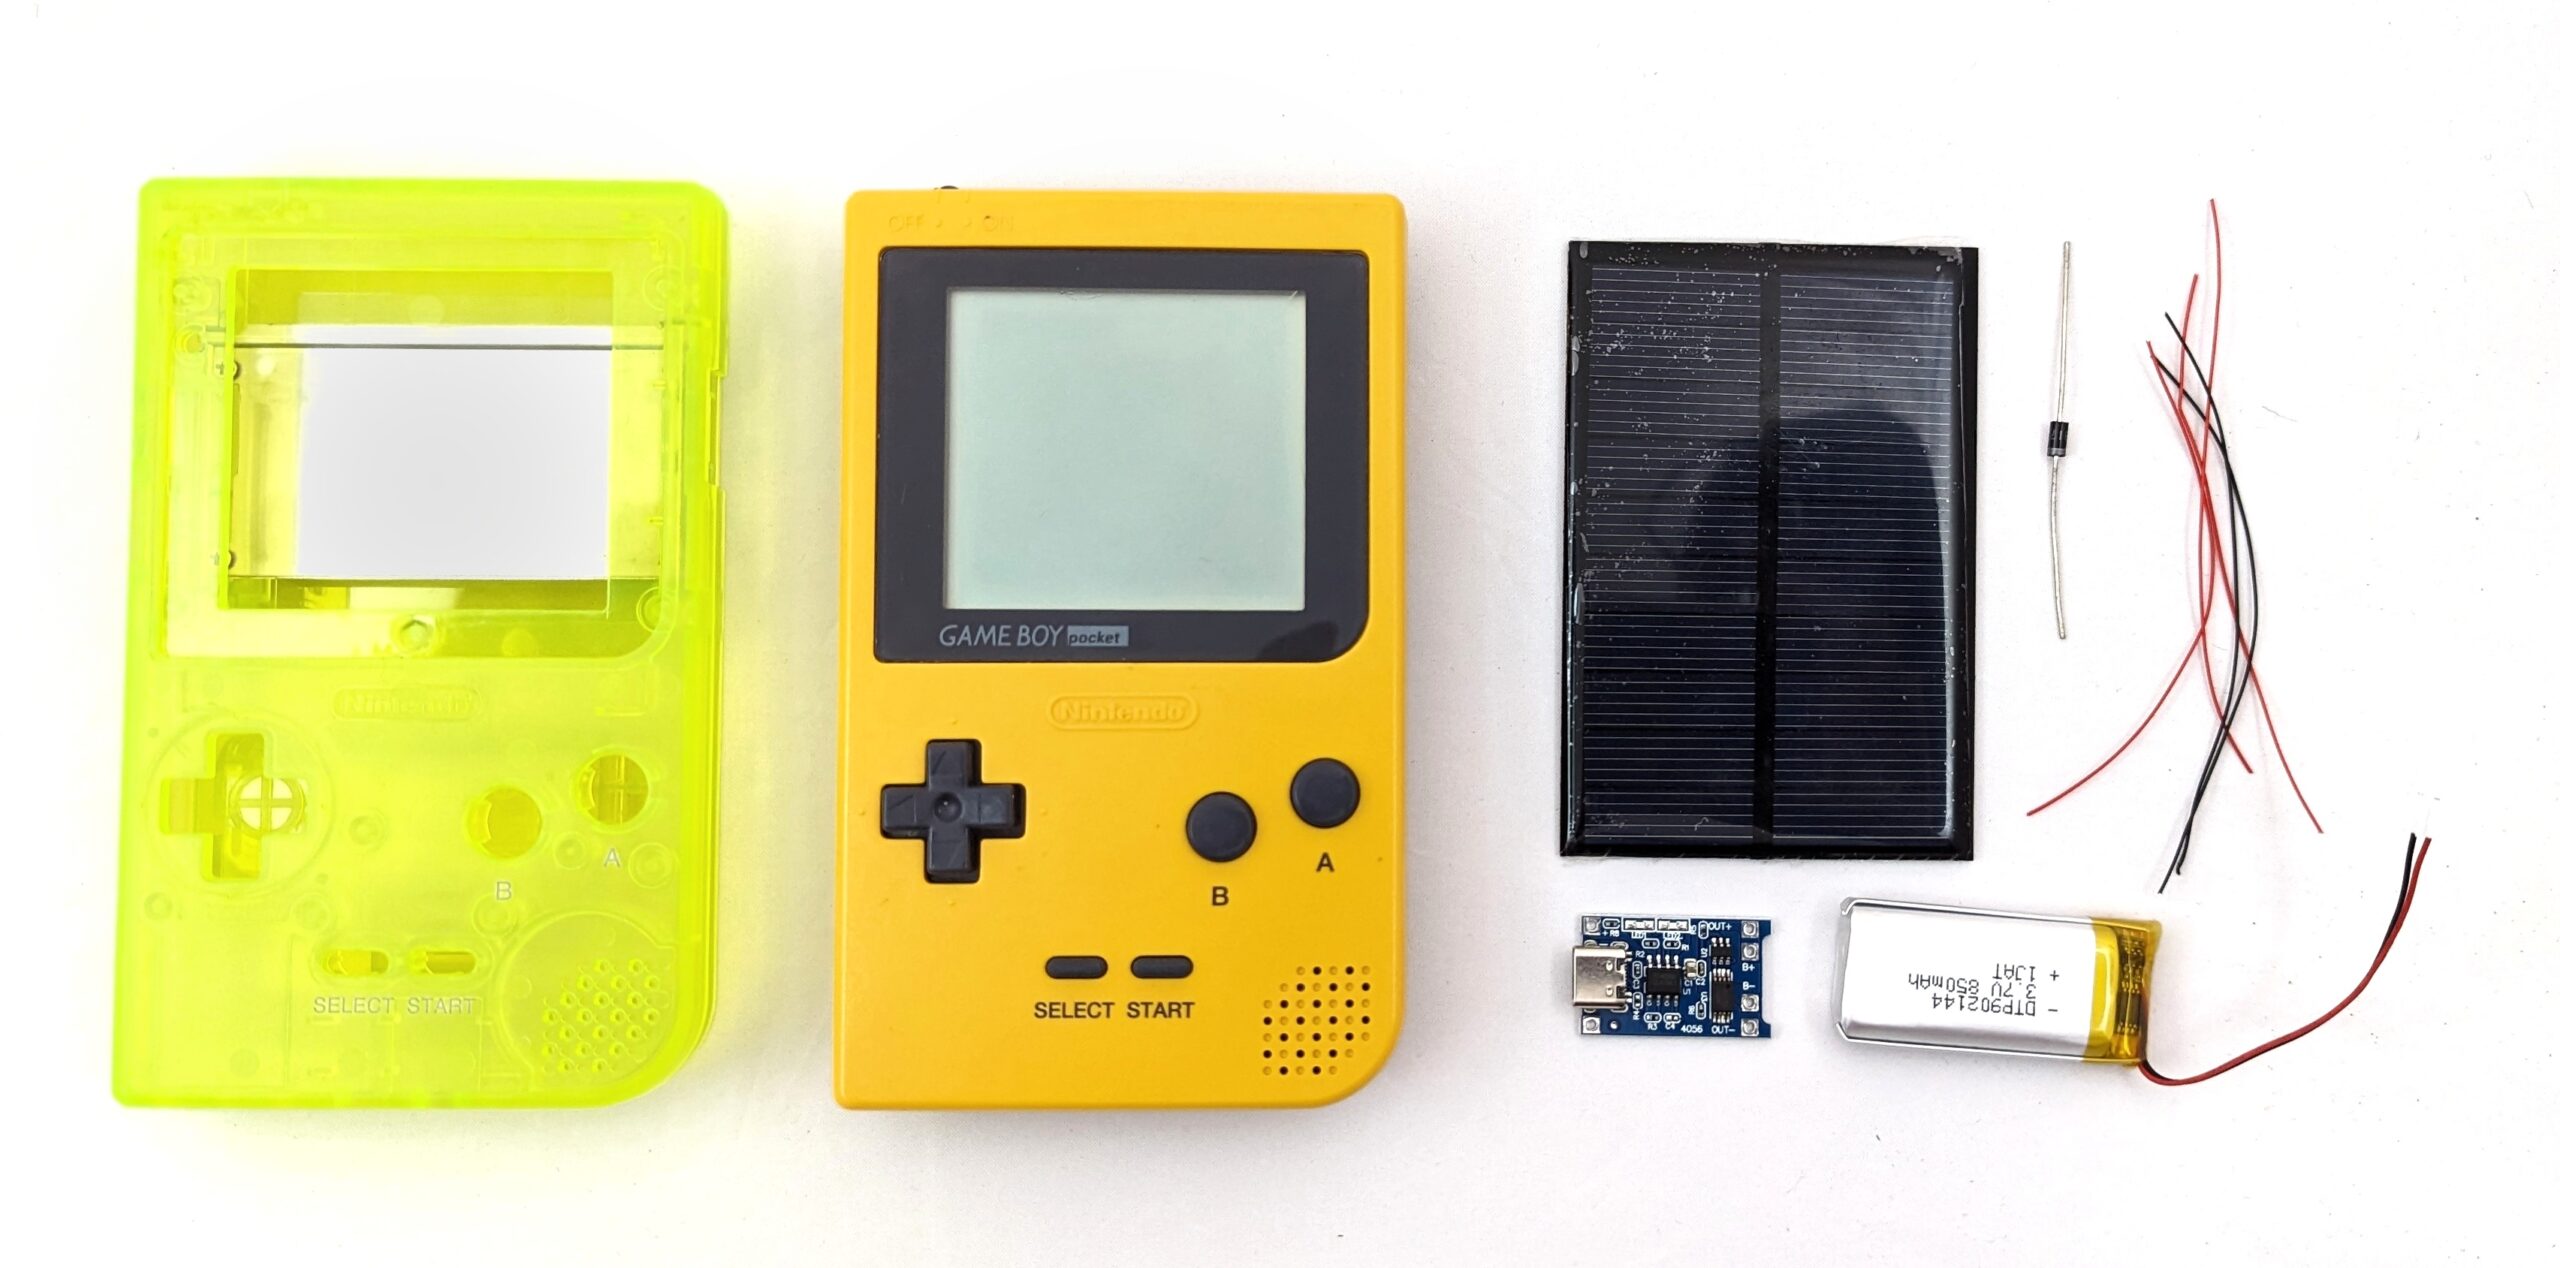 A view of components used in this modding tutorial: a green aftermarket game boy shell, a game boy pocket, a solar panel, a diode, some wire, a charge controller, and a battery.